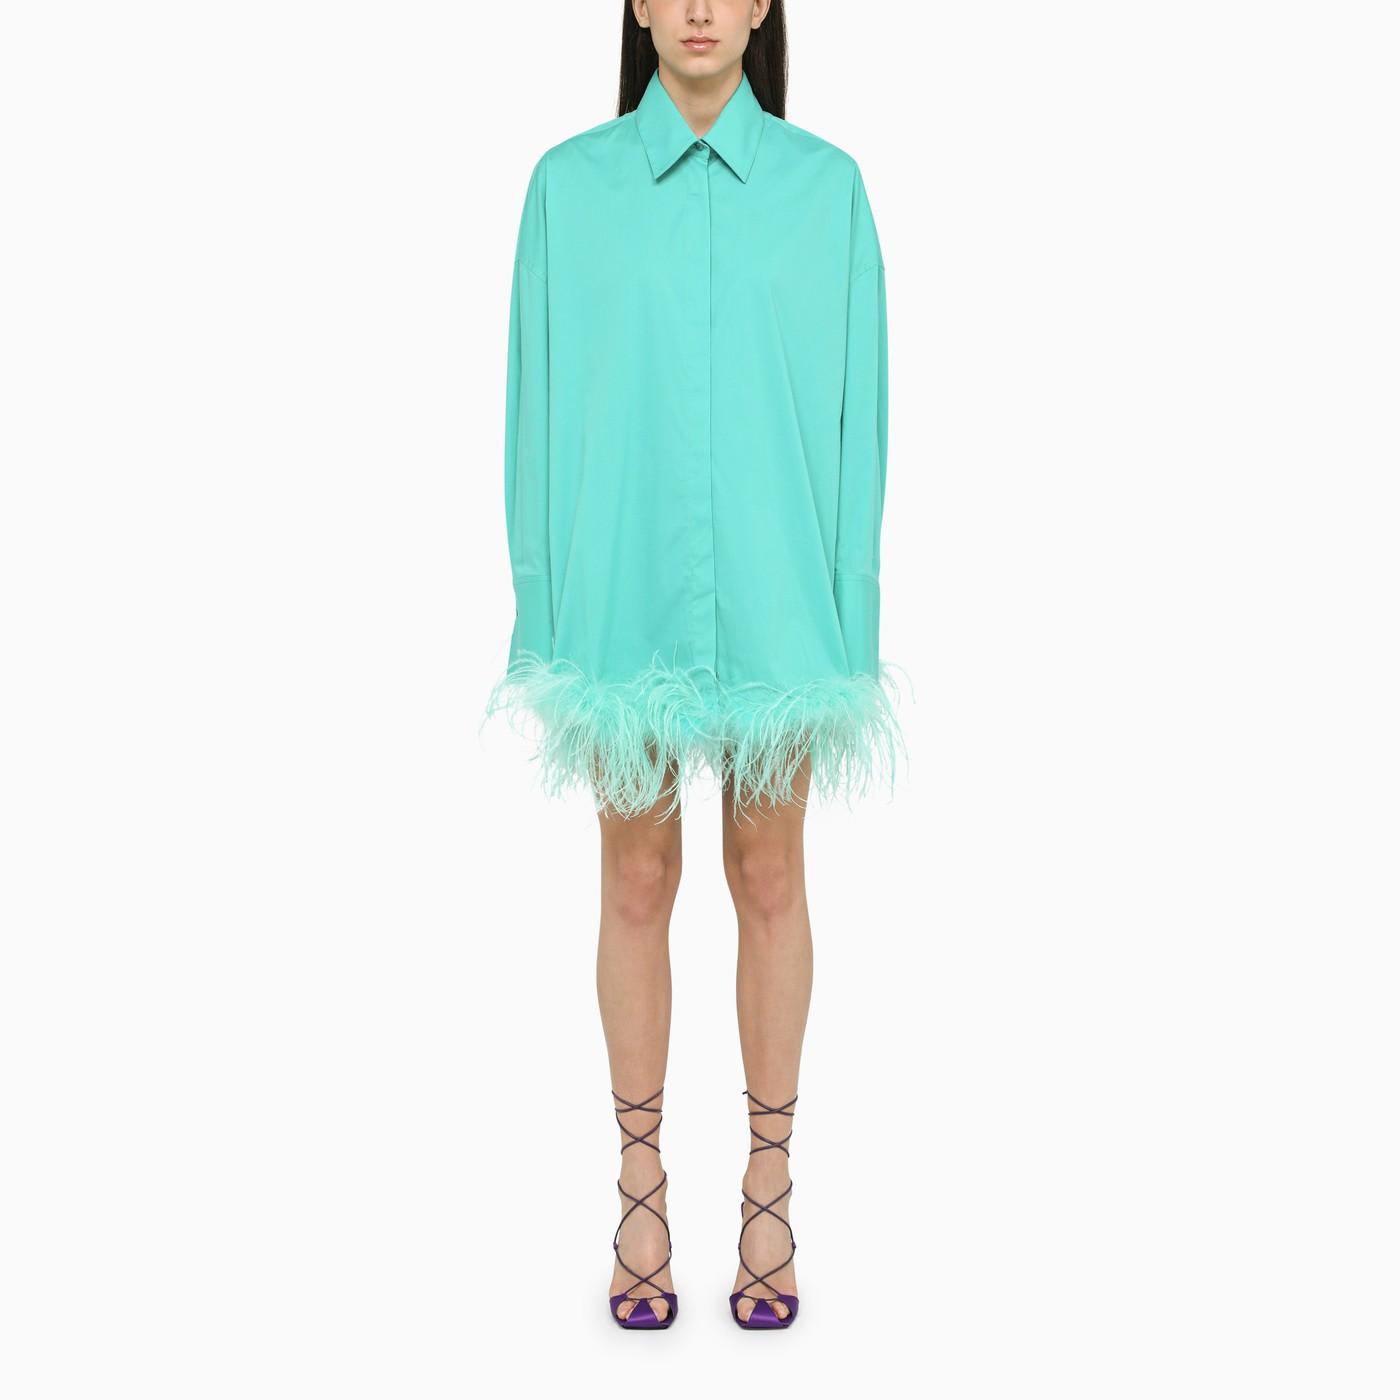 GIUSEPPE DI MORABITO TURQUOISE CHEMISIER DRESS WITH FEATHERS